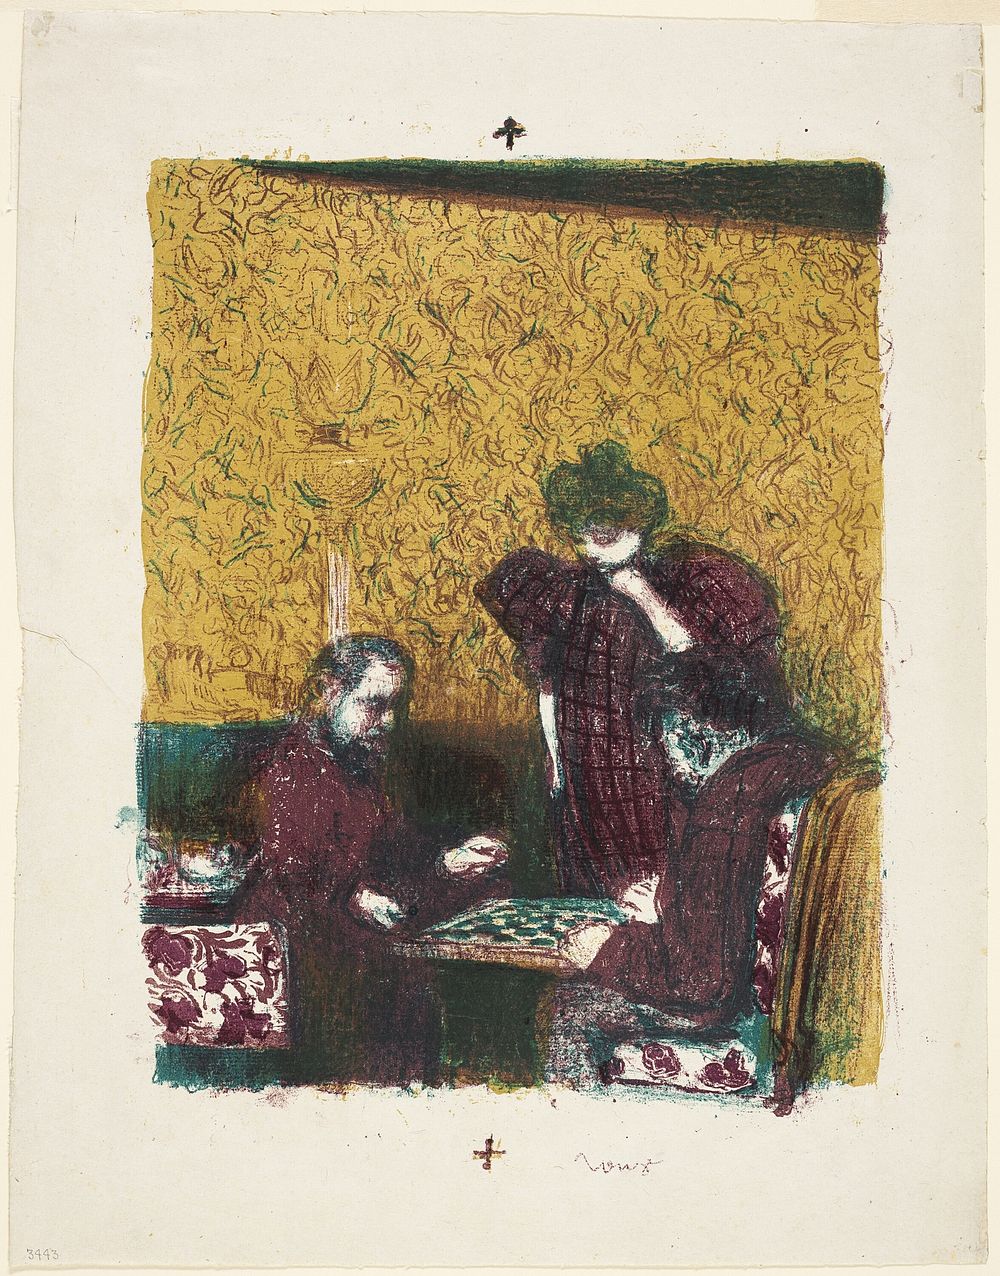 The Game of Checkers by Édouard Jean Vuillard